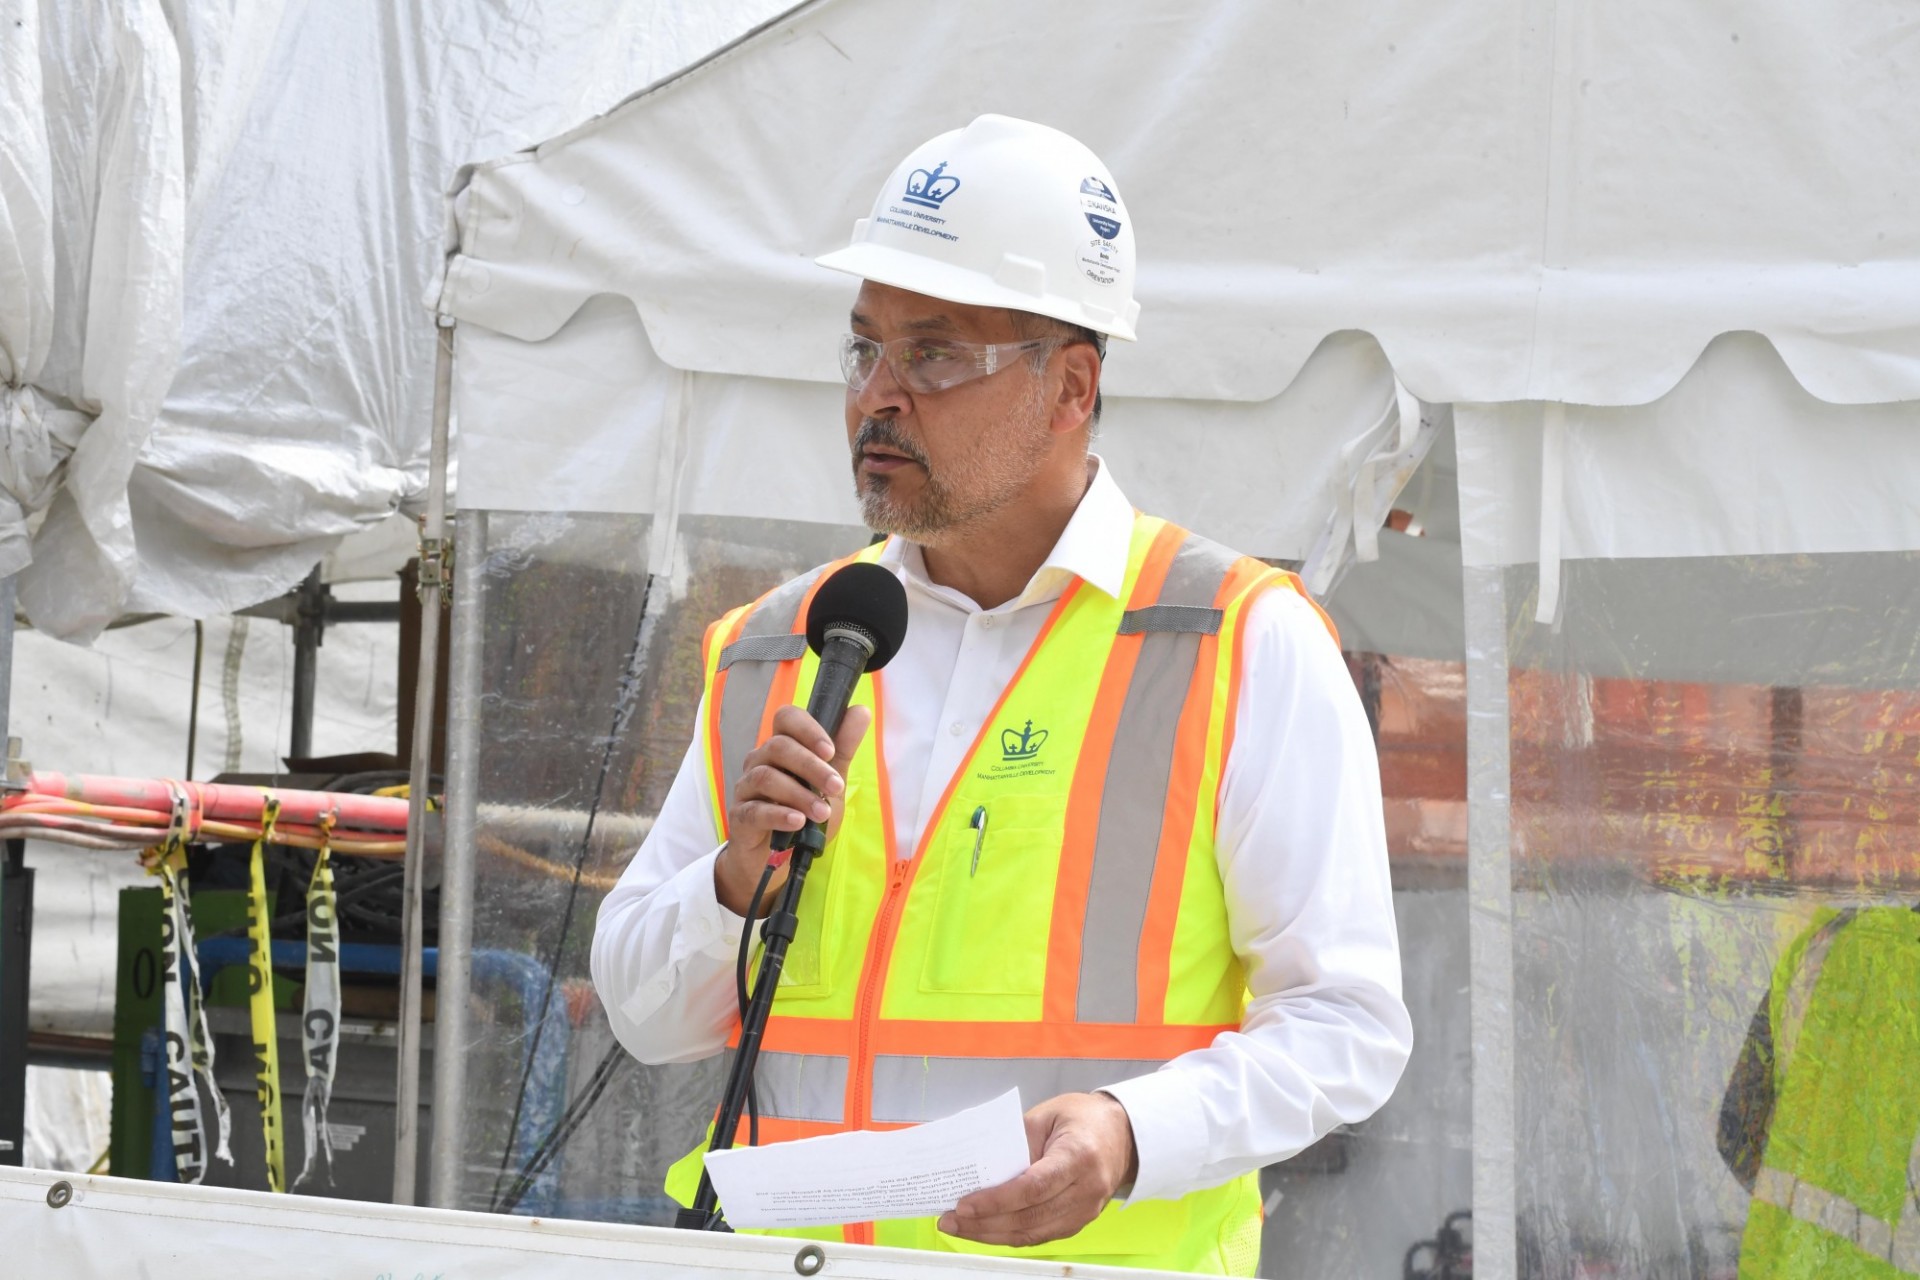 Marcelo Velez speaking at the topping out ceremony for the Columbia Business School in Sept. 2019 (Photo: Eileen Barroso)